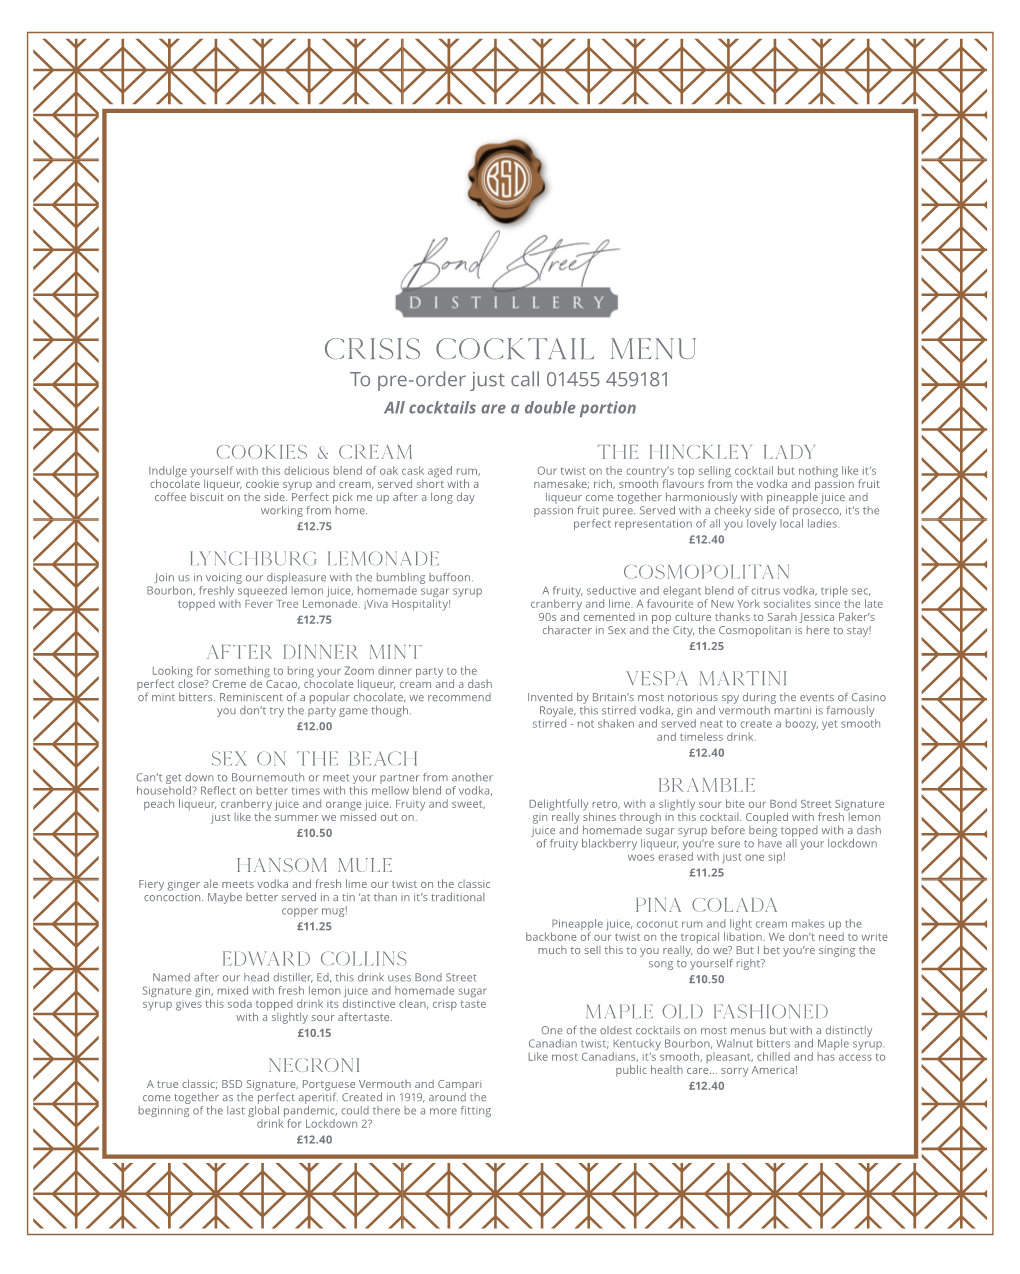 Crisis Cocktail Menu to Pre-Order Just Call 01455 459181 All Cocktails Are a Double Portion